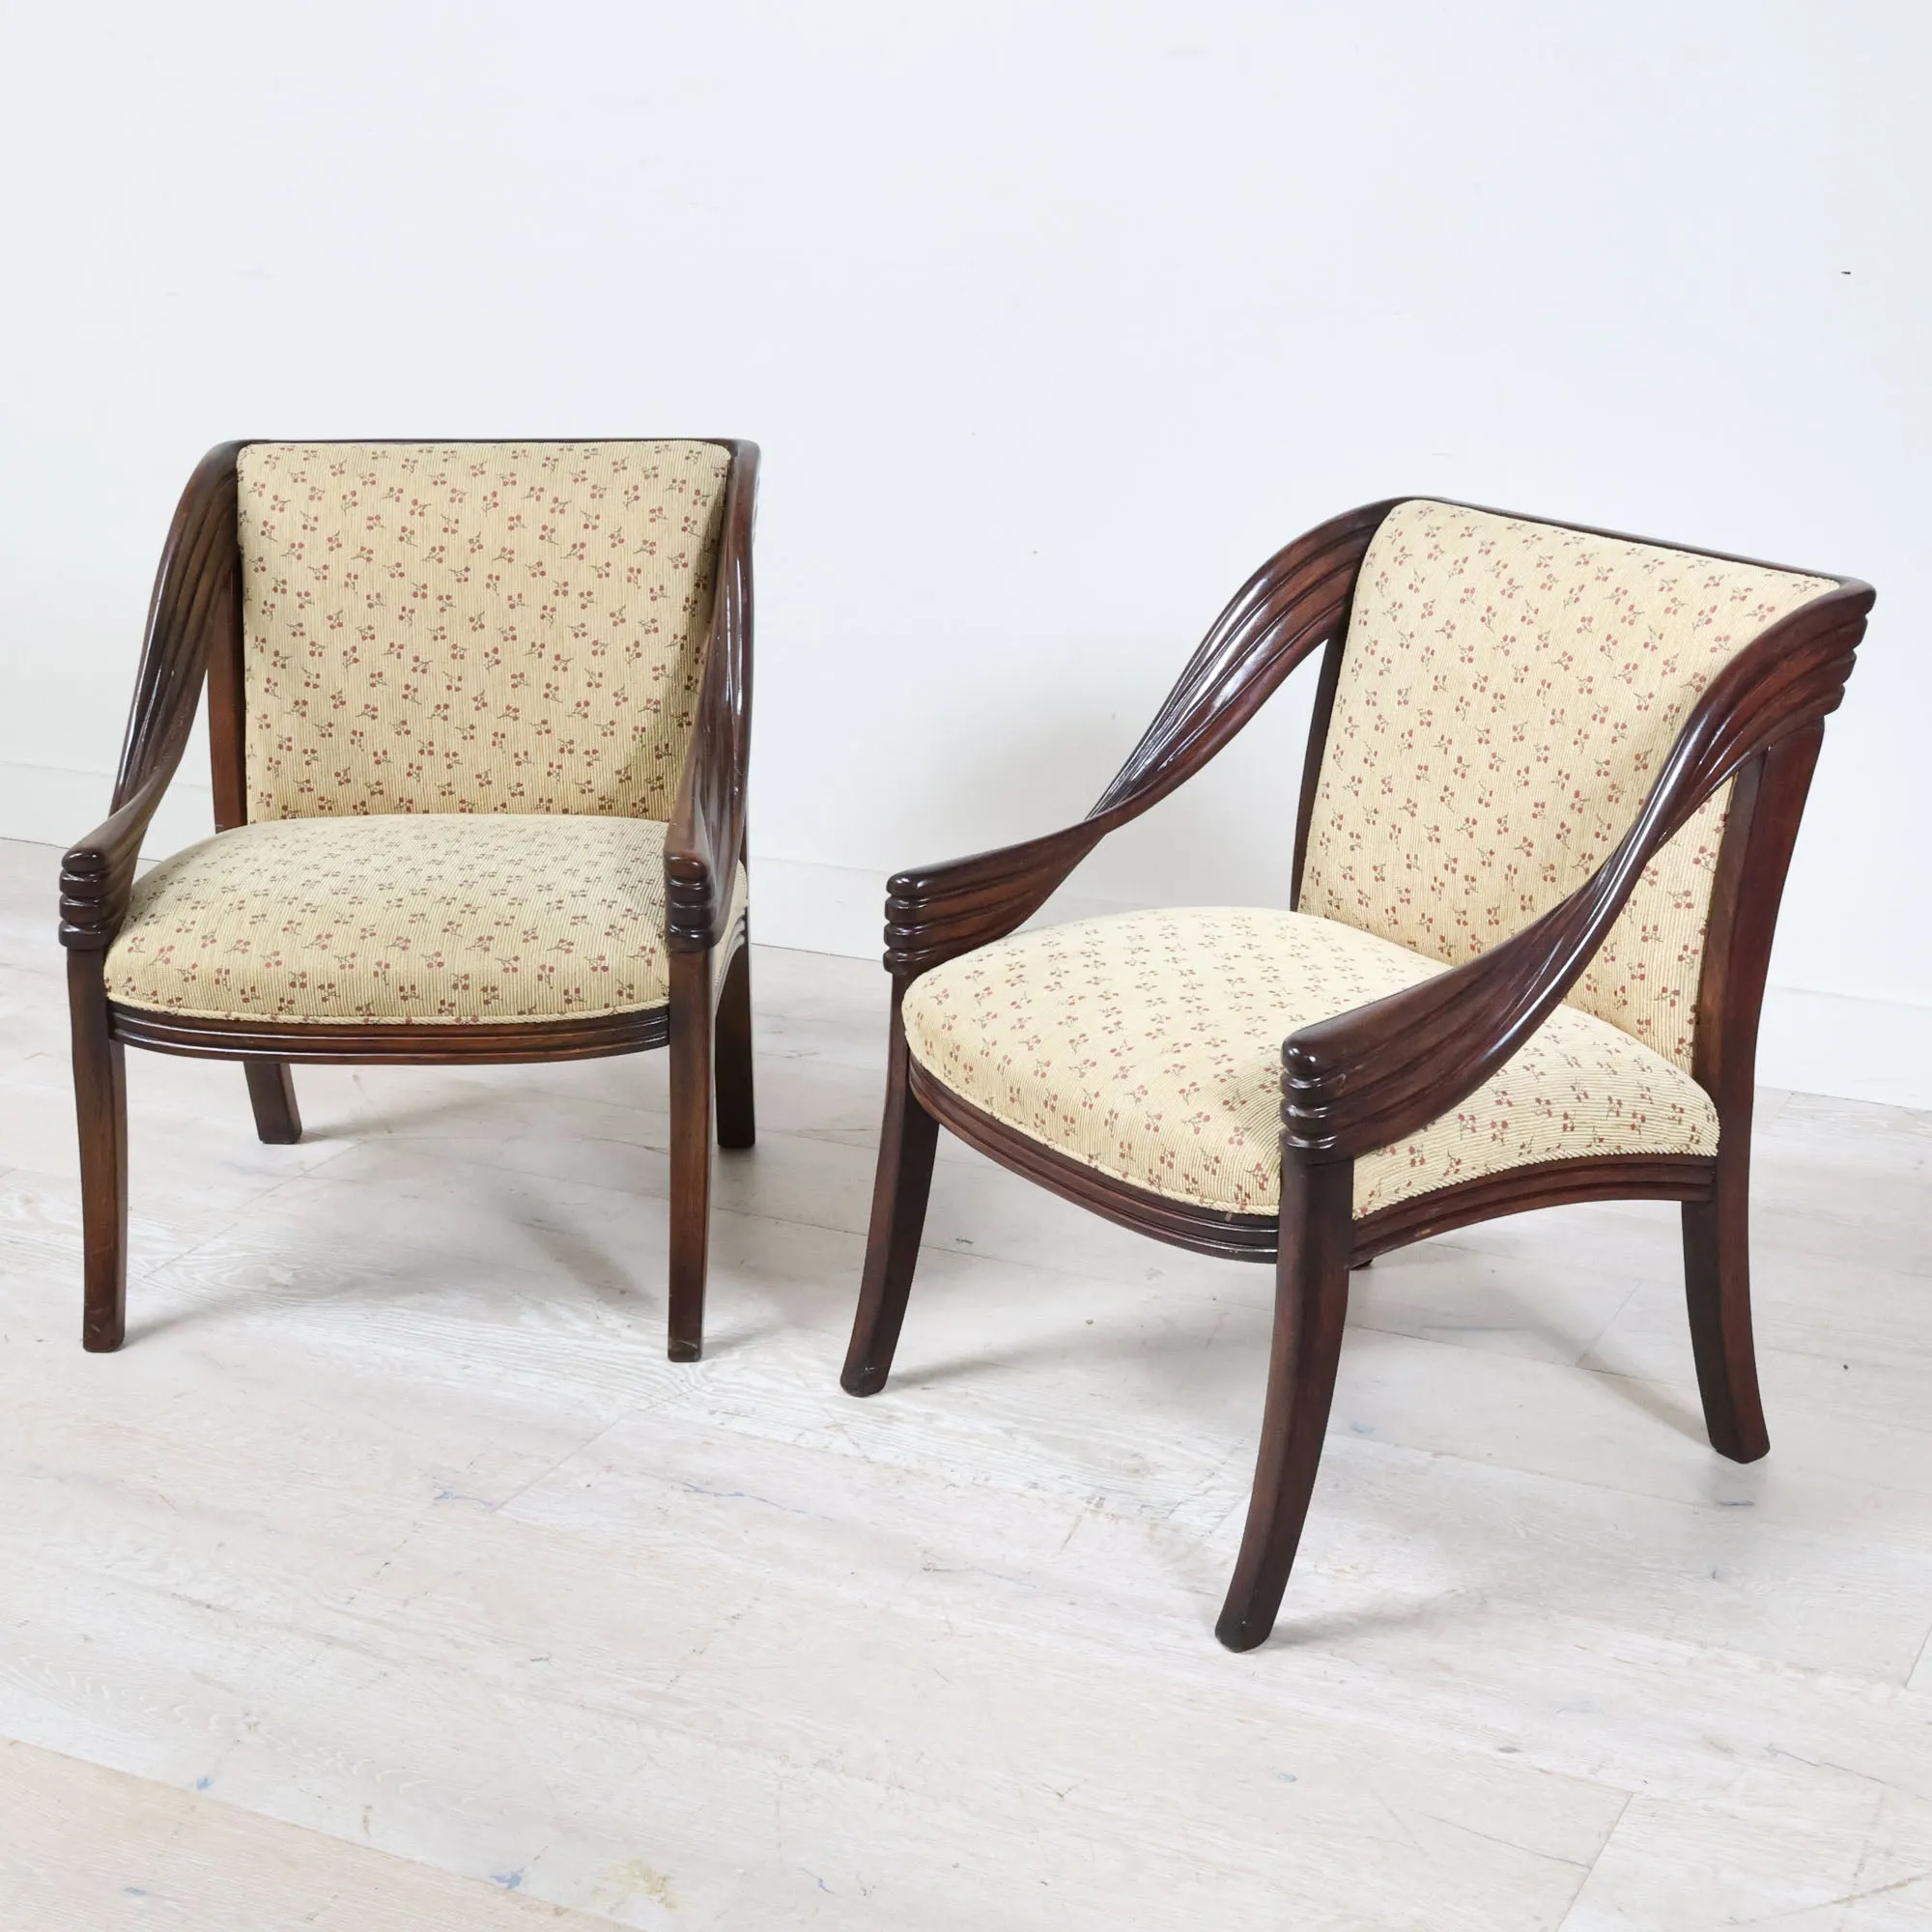 Pair of Curved Arm Chairs